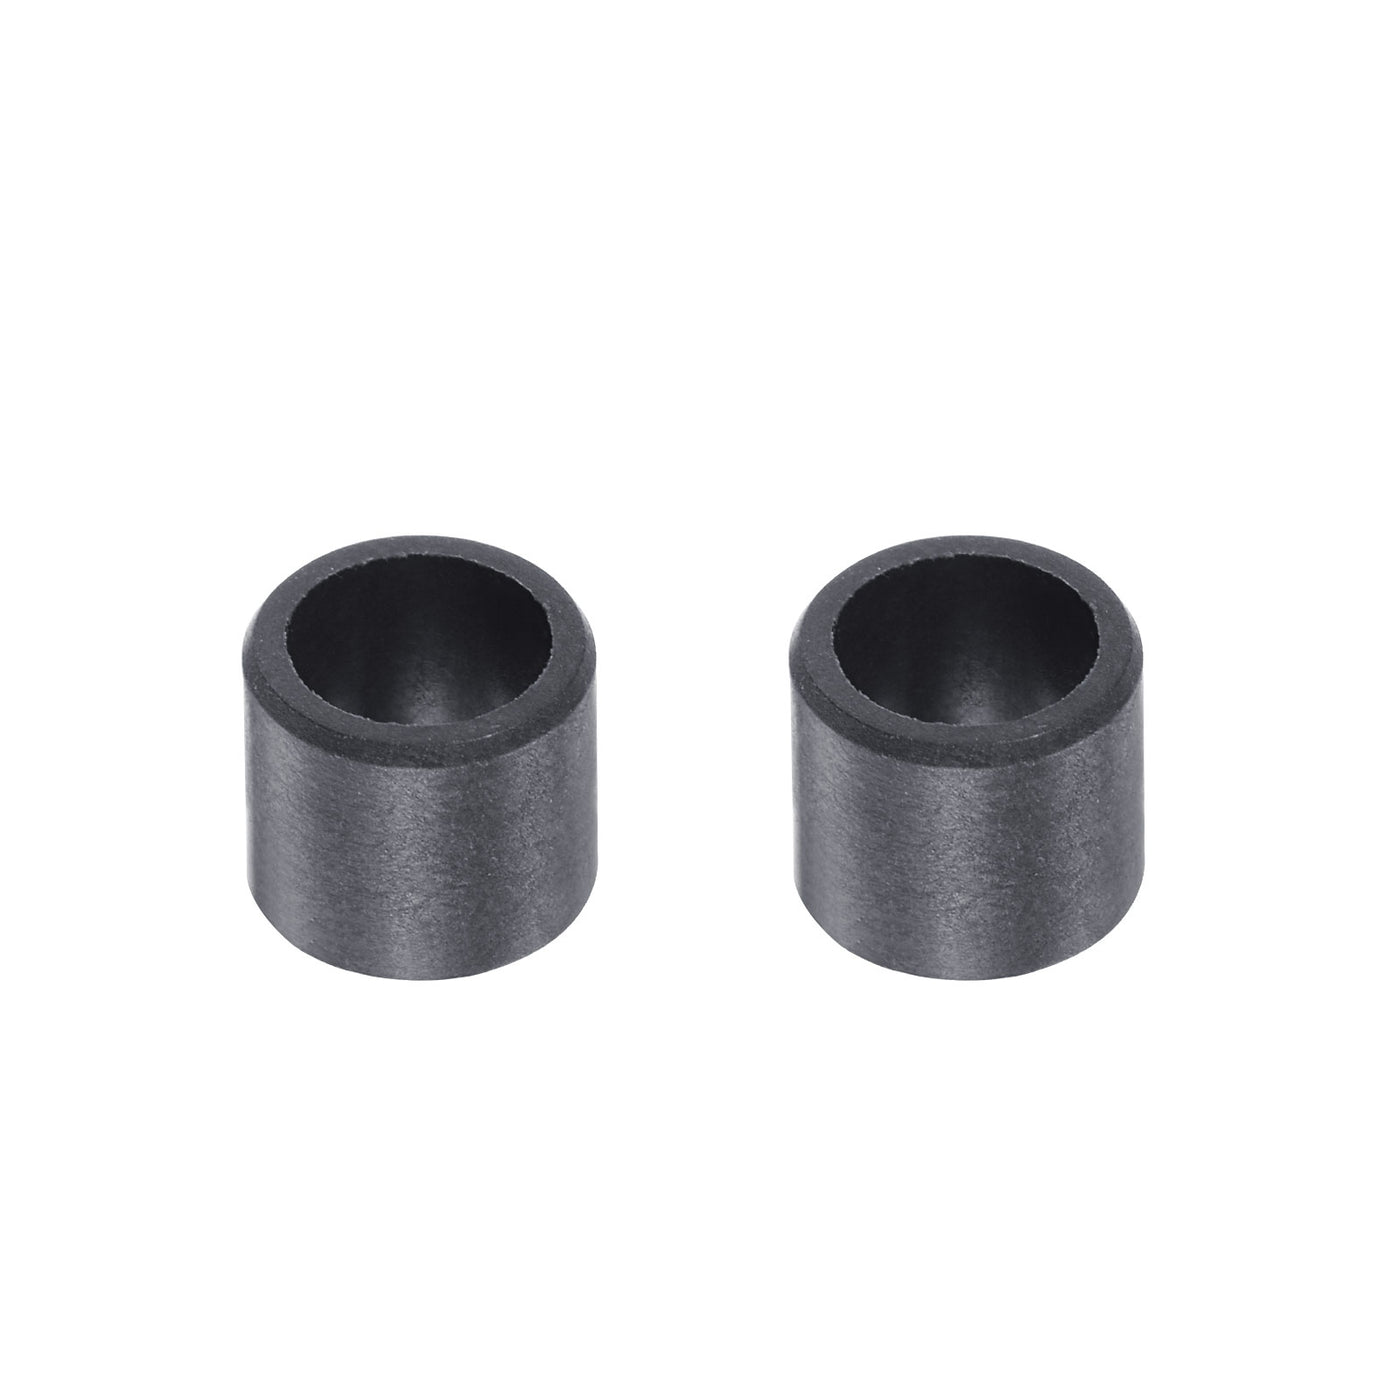 uxcell Uxcell Sleeve Bearings 6mmx8mmx6mm POM Wrapped Oilless Bushings Black 2pcs